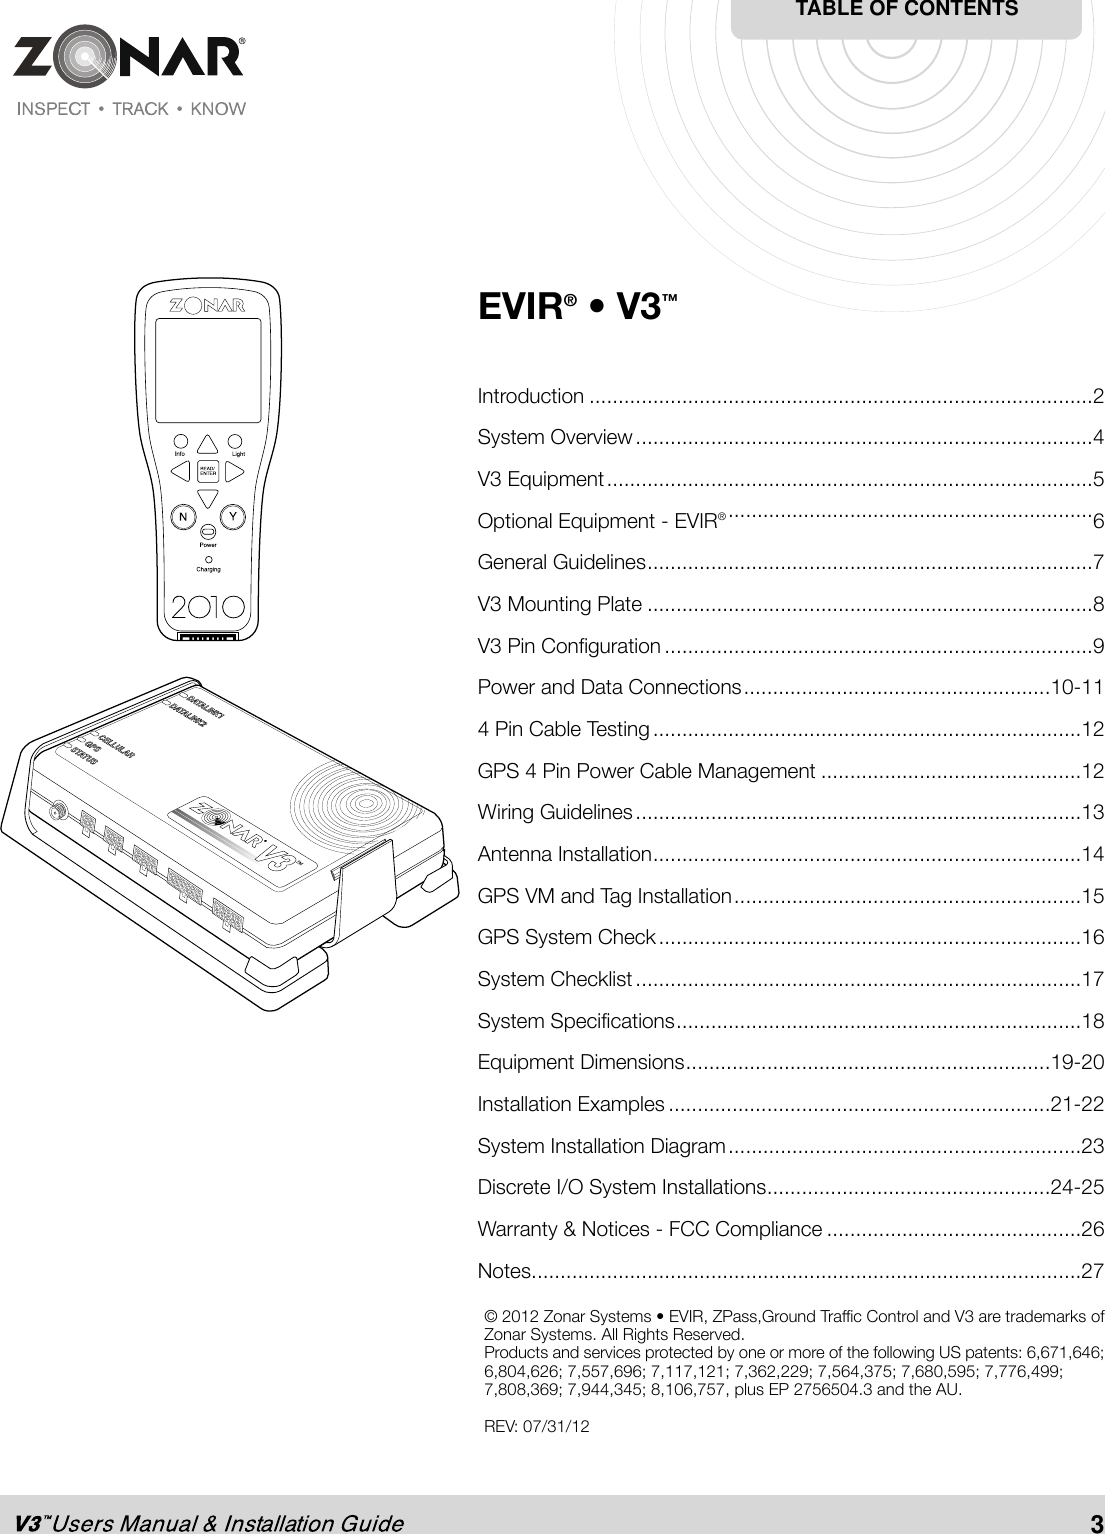 EVIR® • V3™Introduction .......................................................................................2System Overview...............................................................................4V3 Equipment....................................................................................5Optional Equipment - EVIR®...............................................................6General Guidelines.............................................................................7V3 Mounting Plate .............................................................................8V3 Pin Configuration ..........................................................................9Power and Data Connections.....................................................10-114 Pin Cable Testing..........................................................................12GPS 4 Pin Power Cable Management .............................................12Wiring Guidelines.............................................................................13Antenna Installation..........................................................................14GPS VM and Tag Installation............................................................15GPS System Check.........................................................................16System Checklist.............................................................................17System Specifications......................................................................18Equipment Dimensions...............................................................19-20Installation Examples ..................................................................21-22System Installation Diagram.............................................................23Discrete I/O System Installations.................................................24-25Warranty &amp; Notices - FCC Compliance ............................................26Notes...............................................................................................27TABLE OF CONTENTS3© 2012 Zonar Systems • EVIR, ZPass,Ground Traffic Control and V3 are trademarks ofZonar Systems. All Rights Reserved.Products and services protected by one or more of the following US patents: 6,671,646;6,804,626; 7,557,696; 7,117,121; 7,362,229; 7,564,375; 7,680,595; 7,776,499;7,808,369; 7,944,345; 8,106,757, plus EP 2756504.3 and the AU.REV: 07/31/12